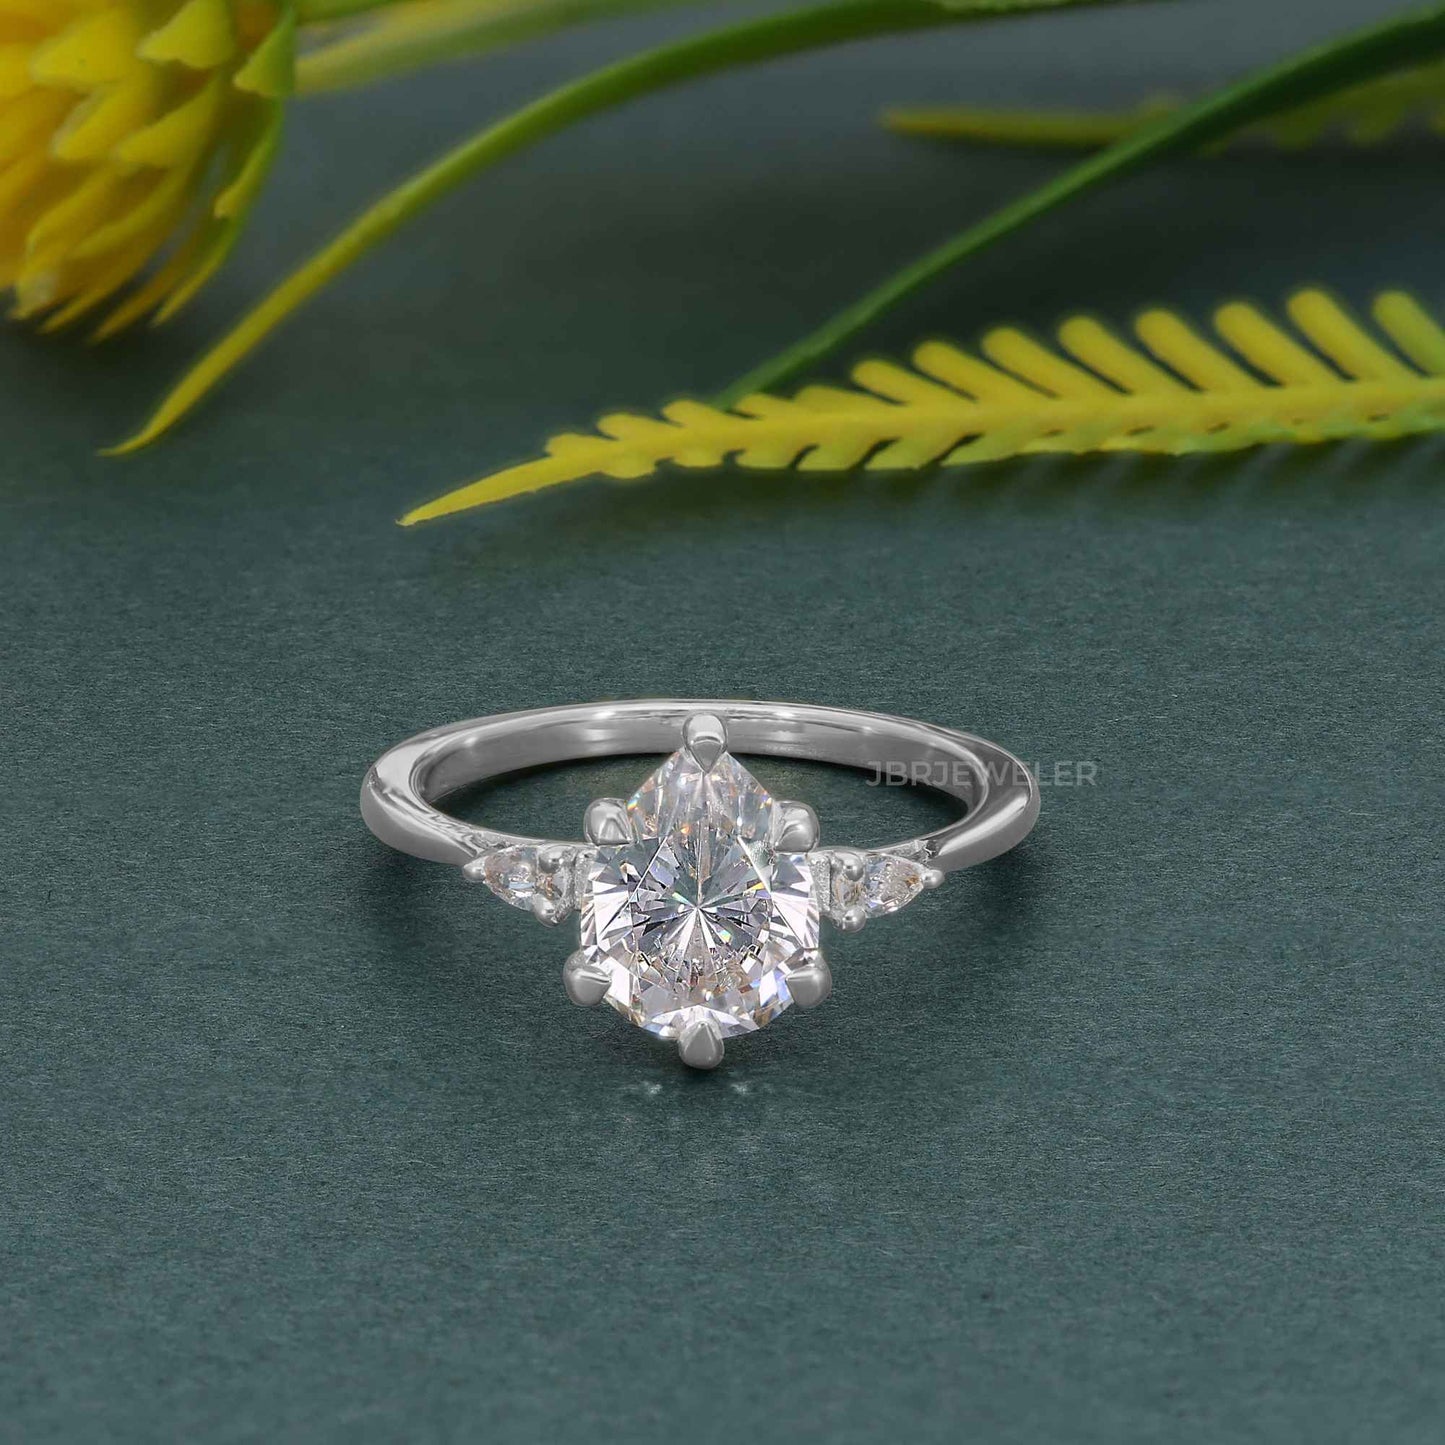 Perfect Fit Three Stone Pear Moissanite Diamond Ring With Side Stone